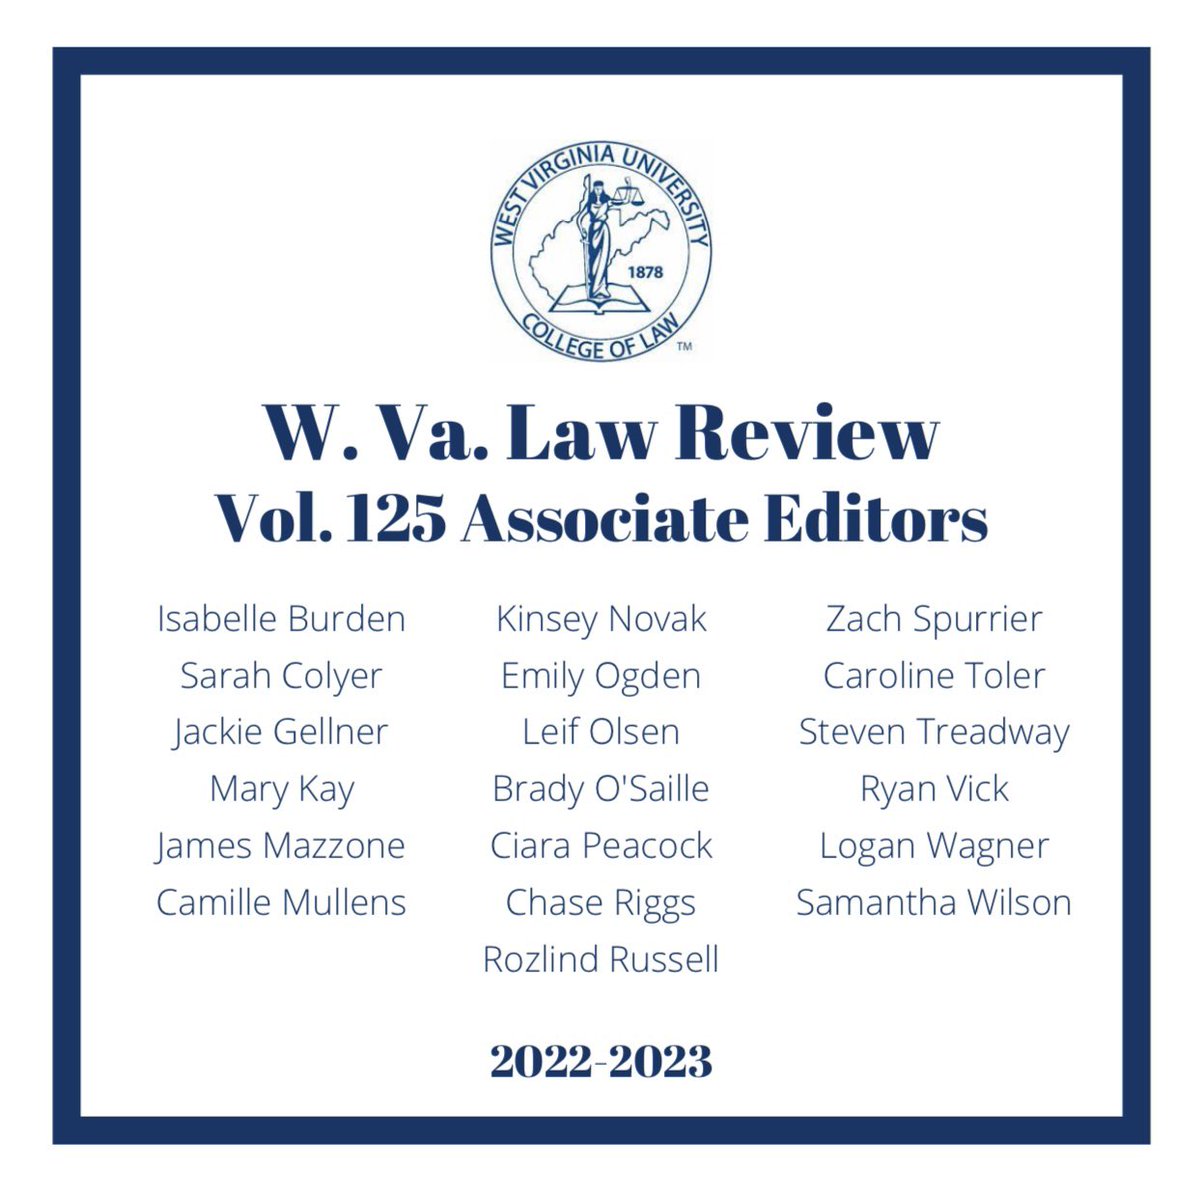 Congratulations to our newest Associate Editors! The West Virginia Law Review is excited to get to work on Vol. 125!